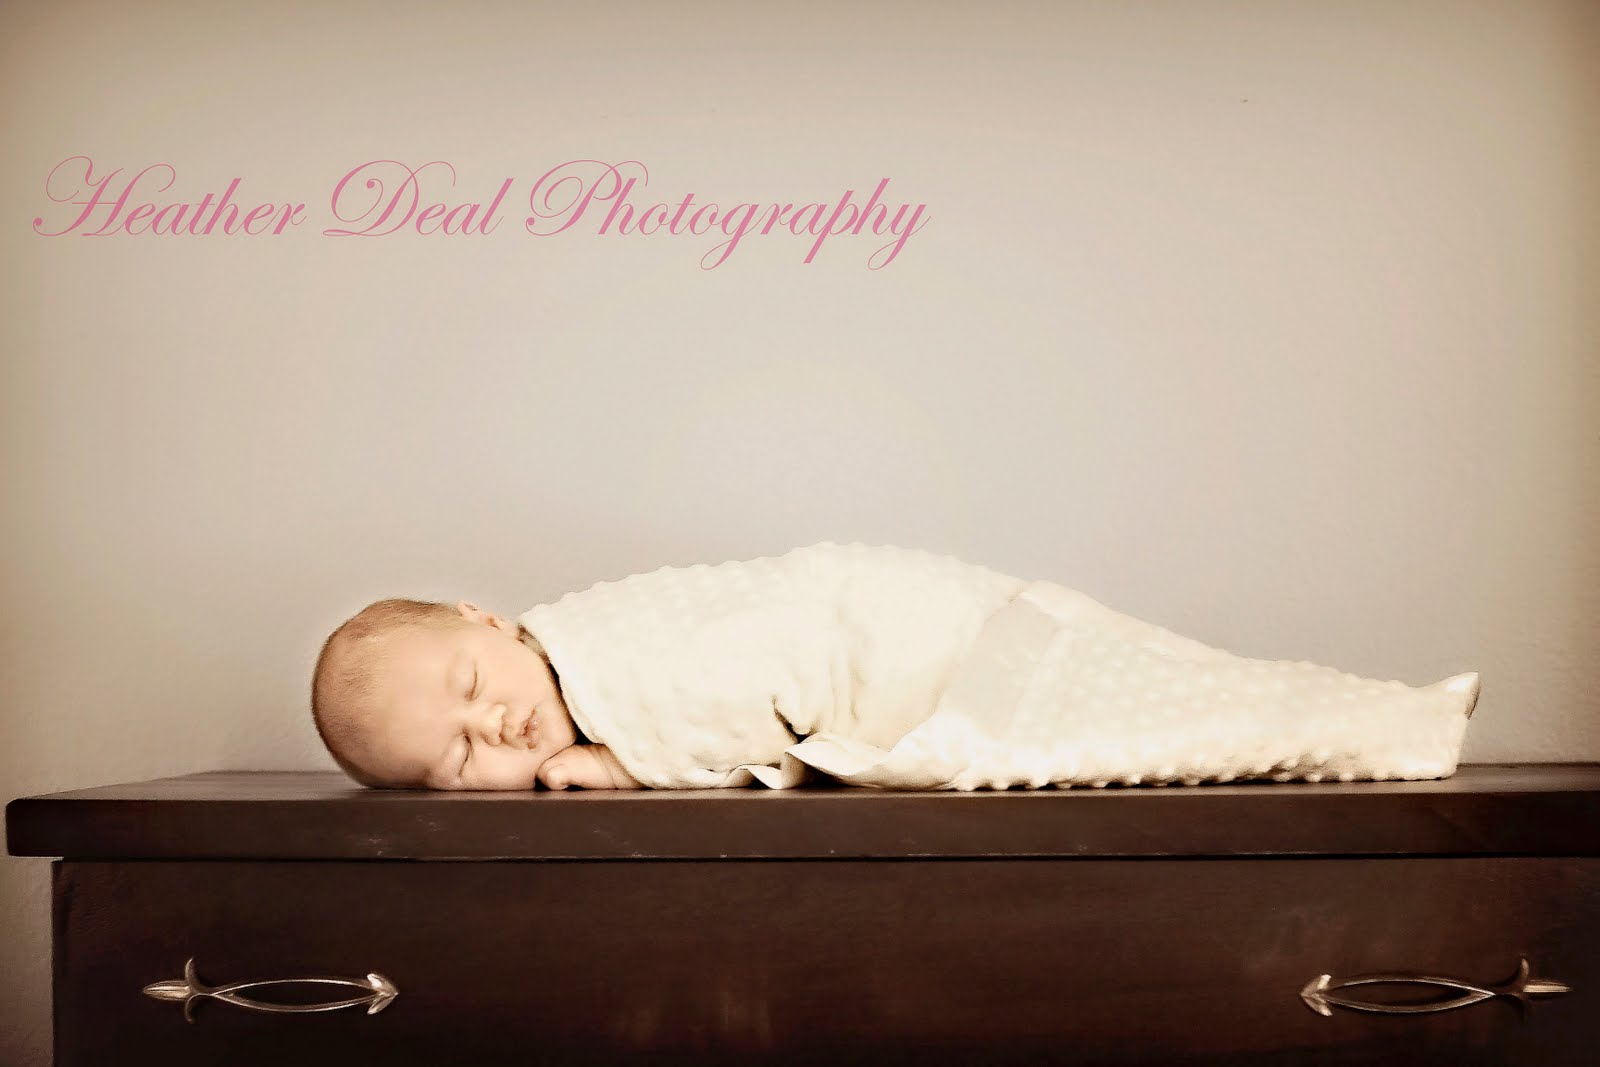 Heather Deal Photography